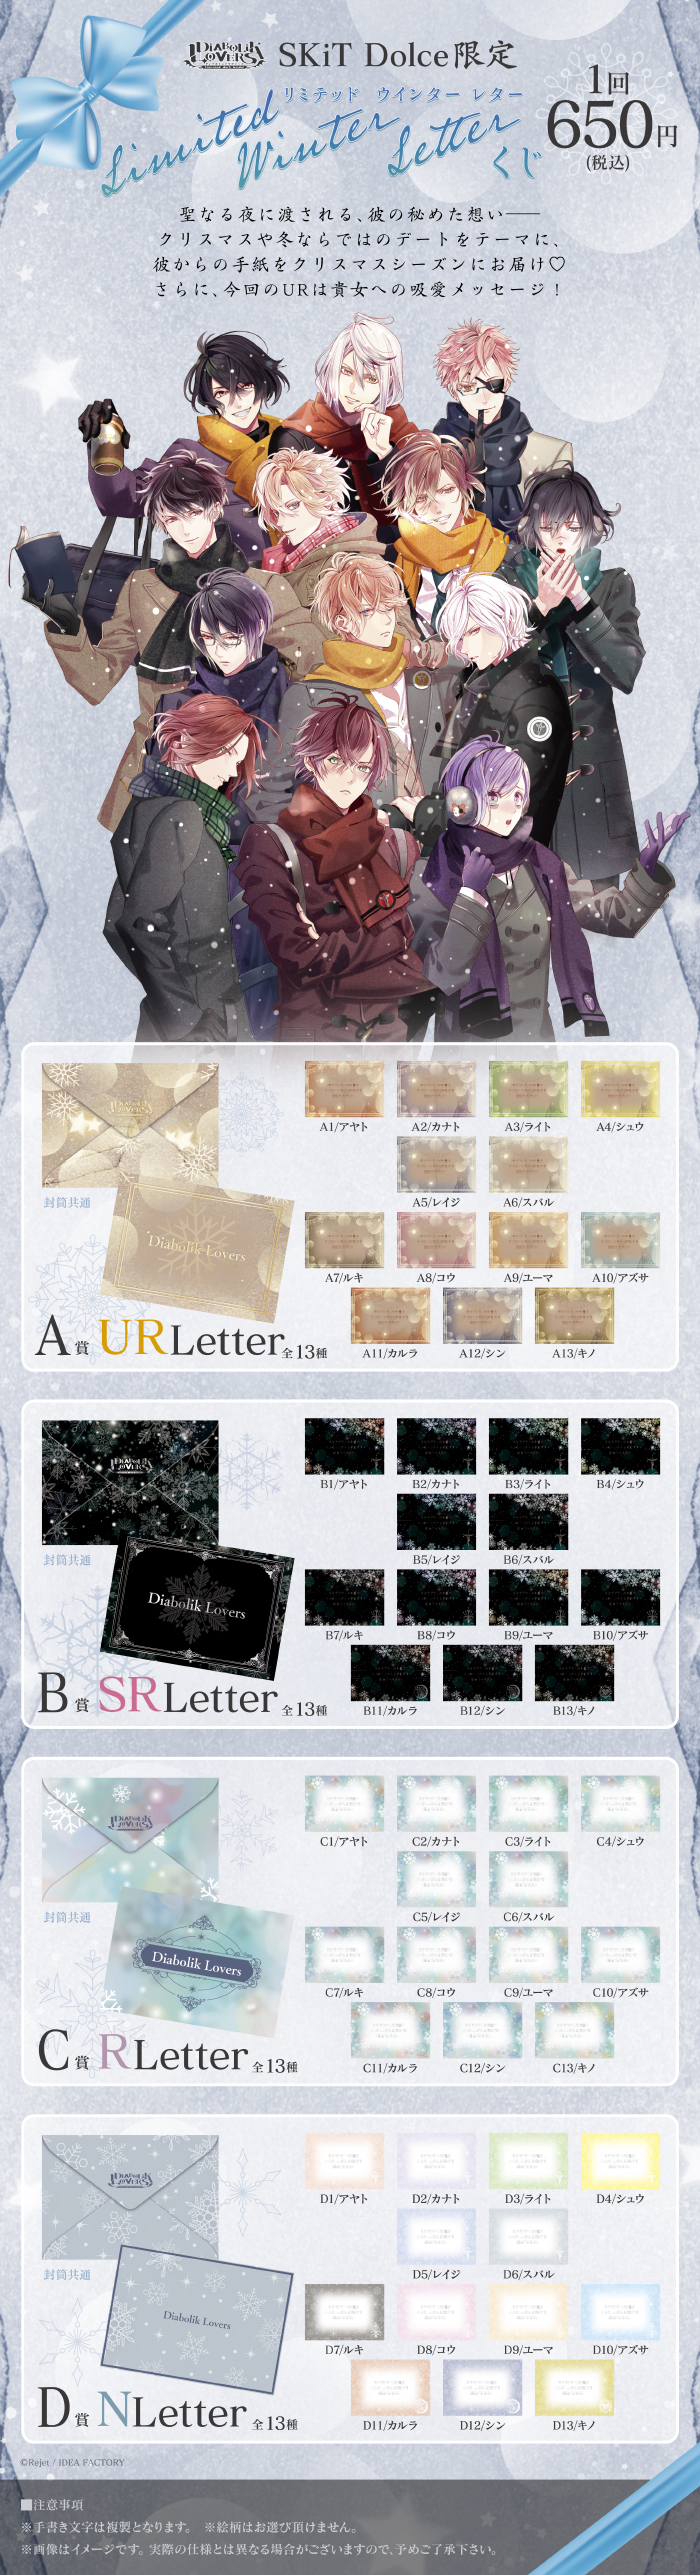 【SKiT Dolce限定】DIABOLIK LOVERS Limited Winter Letterくじ